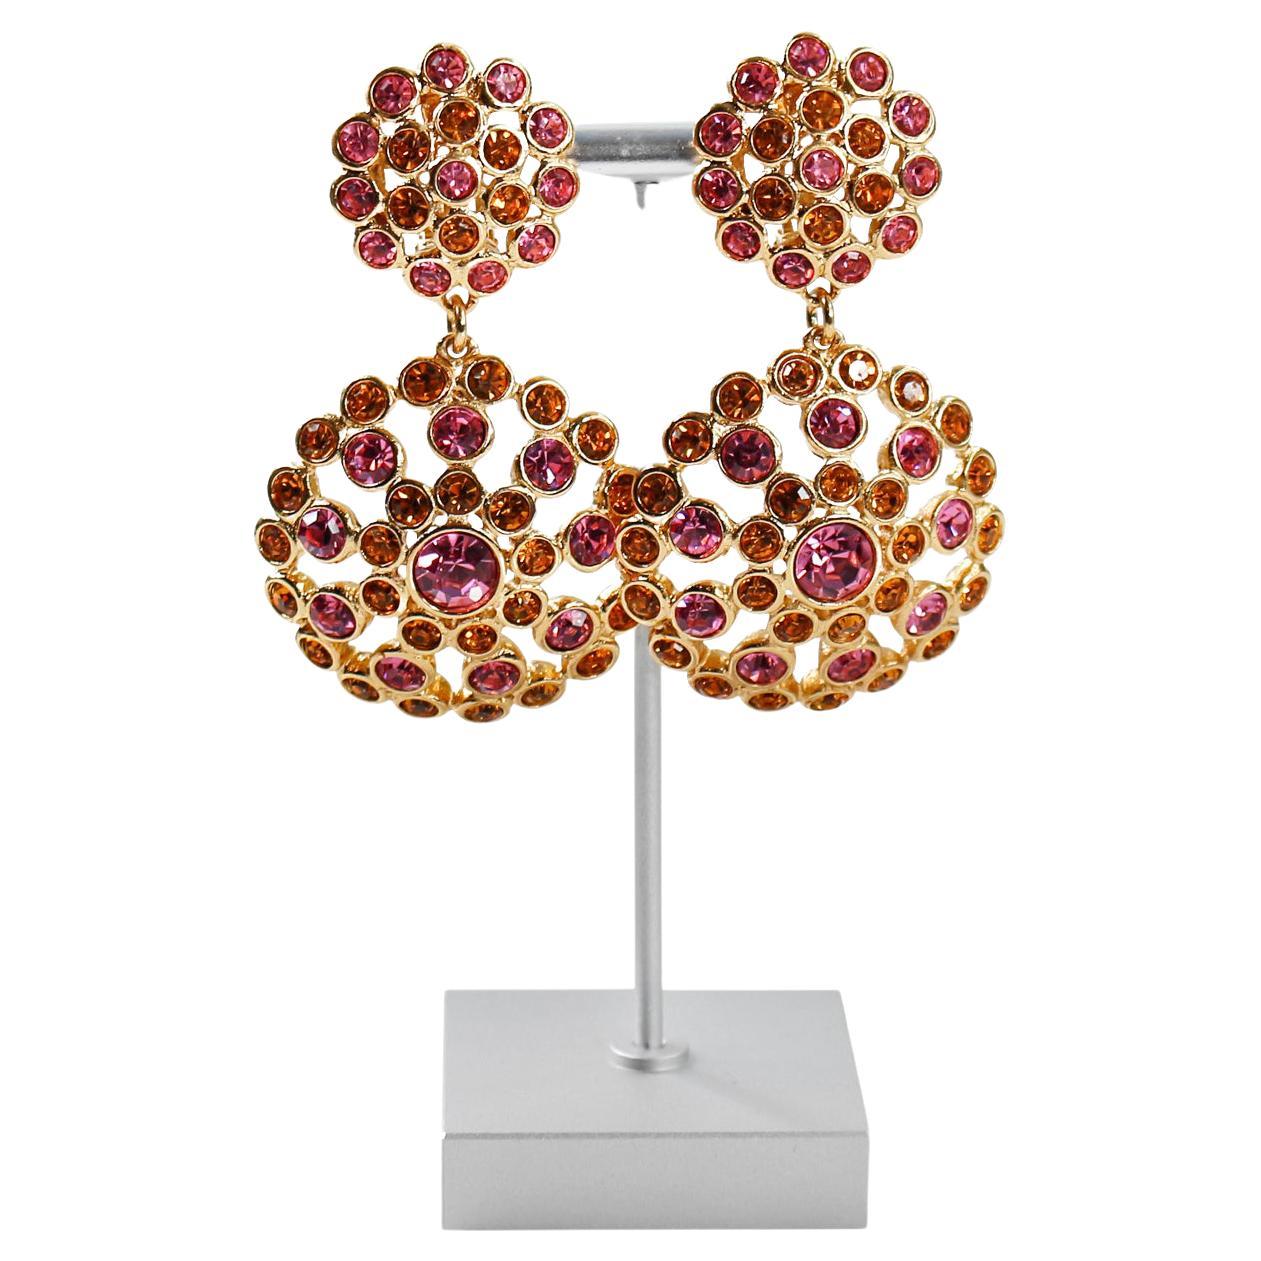 Vintage YSL Pink and Amber Color Dangling Earrings.  They are two round discs on top of each other to form these earrings.  As they are Slightly Domed you see earrings almost all the way around. The height of Chic! Clip On.  To see these earrings in